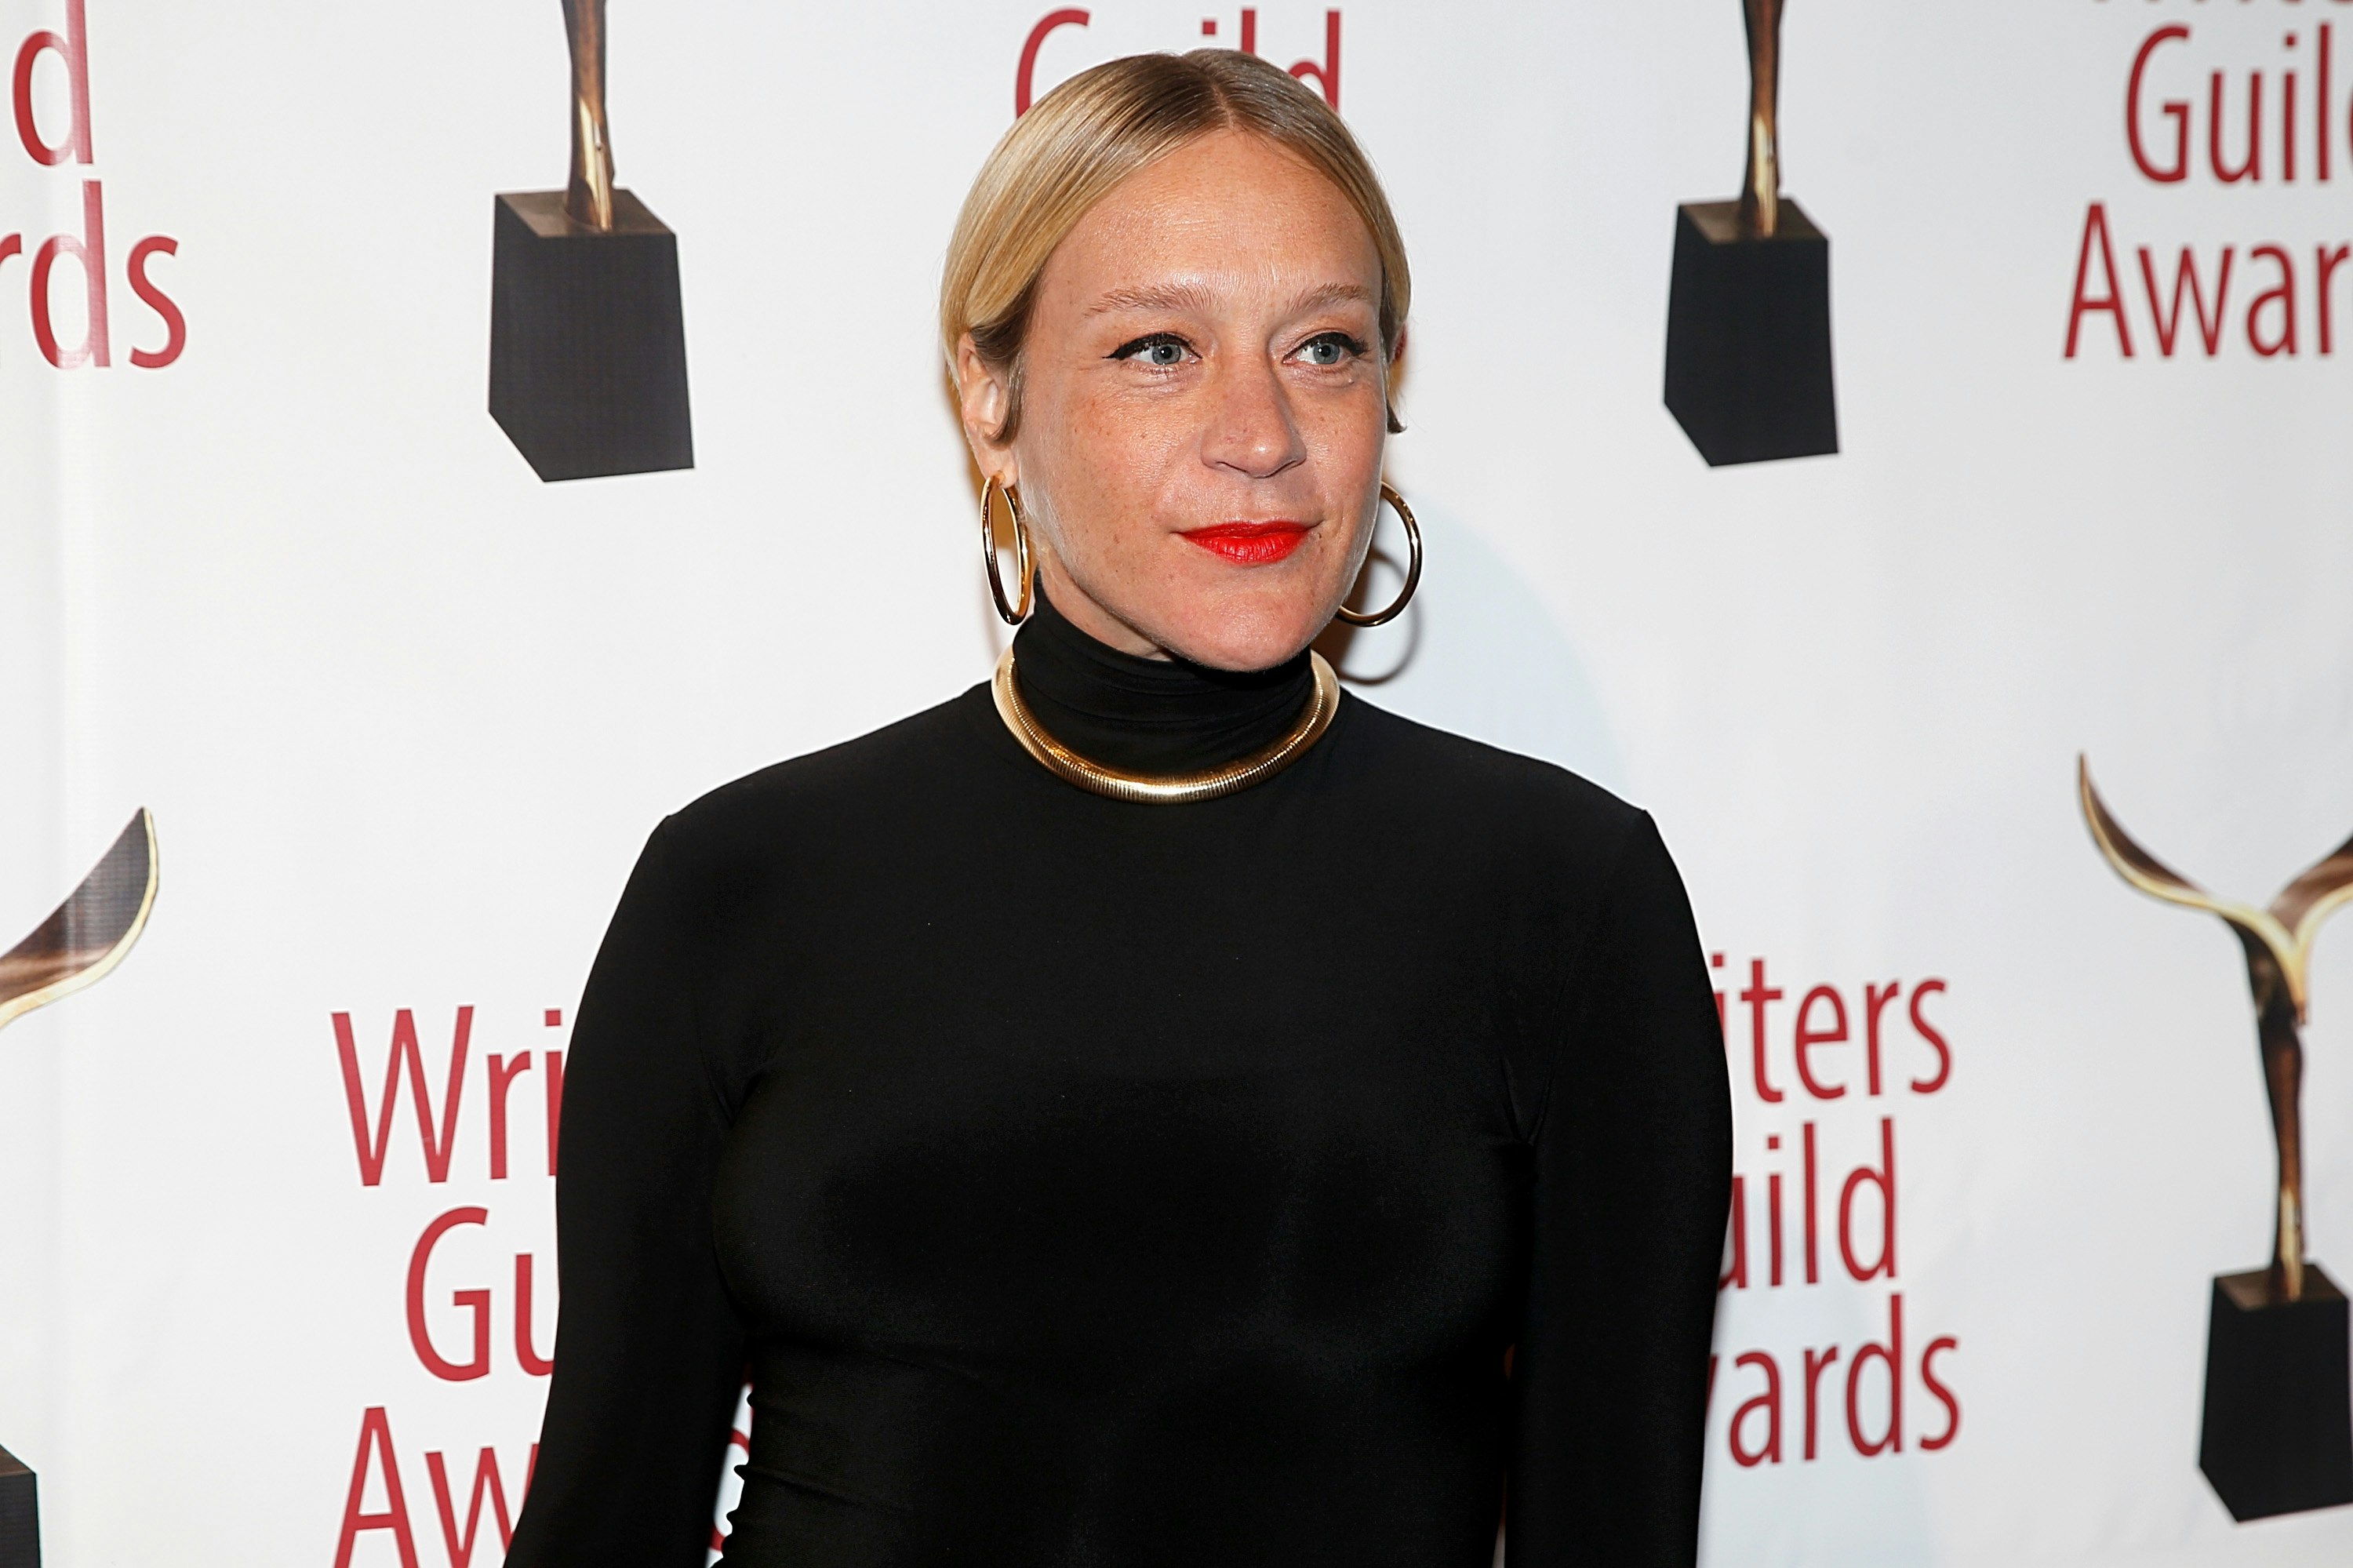 31 Chloe Sevigny Rene Photos & High Res Pictures - Getty Images